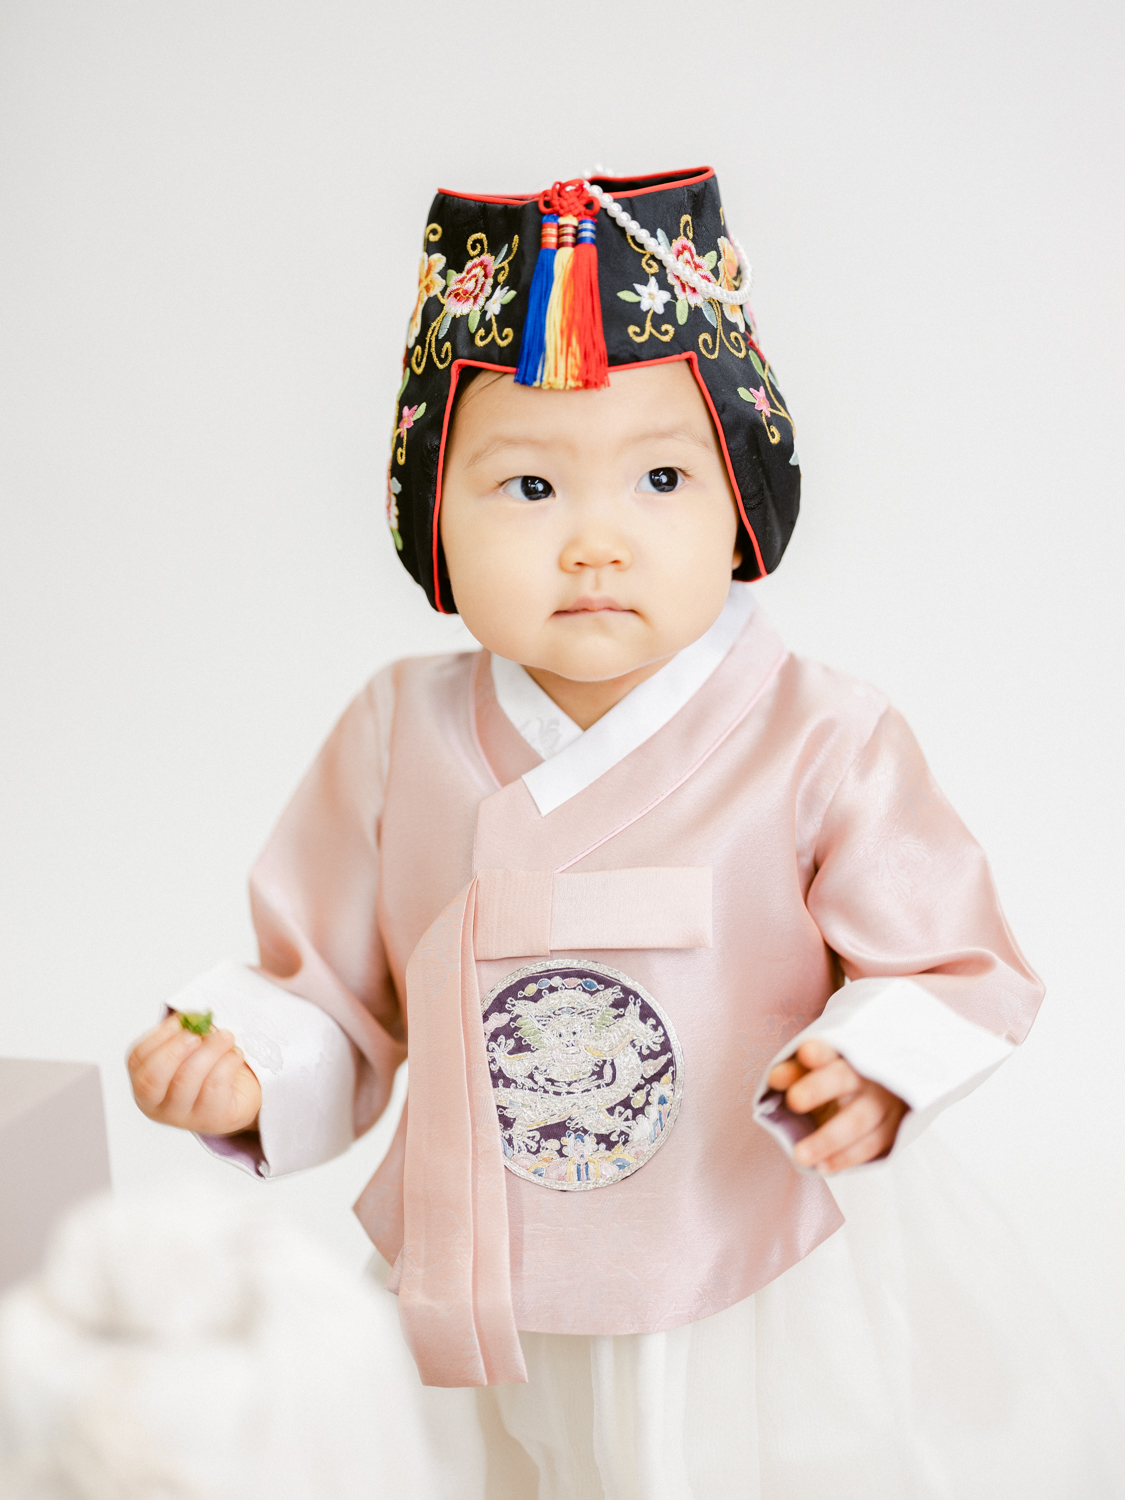 How to Celebrate Dol - Korean First Birthday Traditions - Celebrant